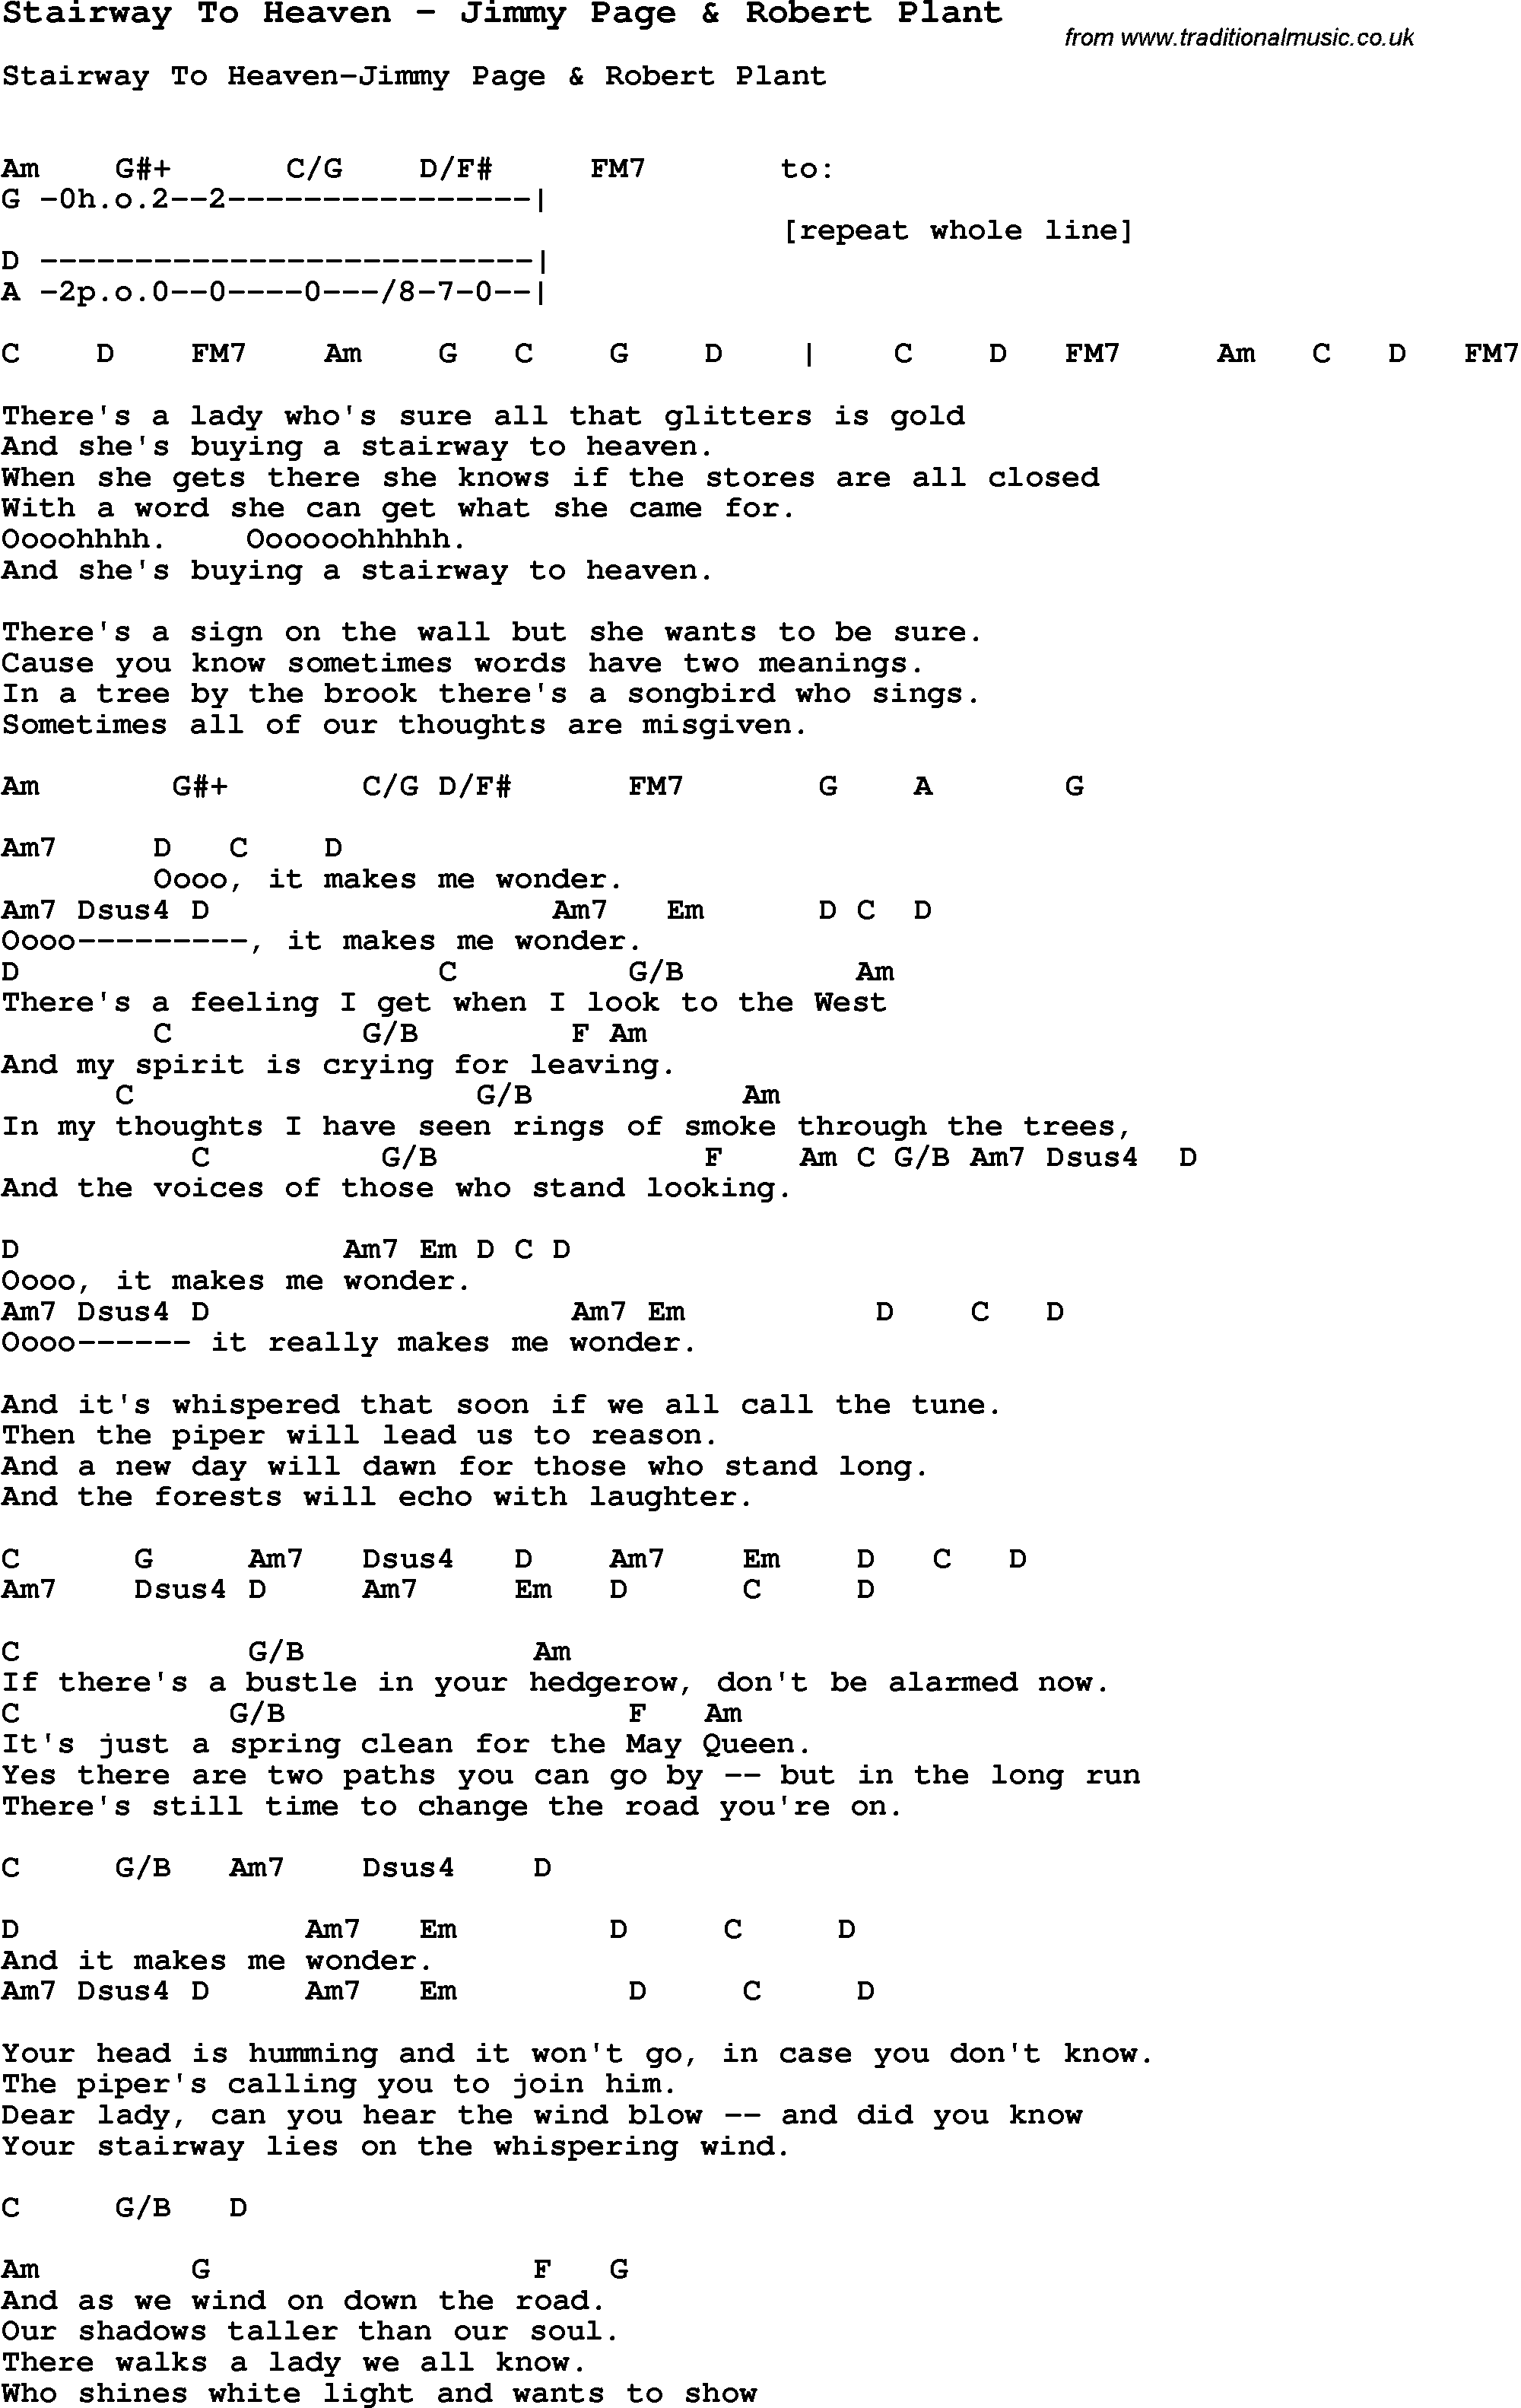 Song Stairway To Heaven by Jimmy Page & Robert Plant, with lyrics for vocal performance and accompaniment chords for Ukulele, Guitar Banjo etc.